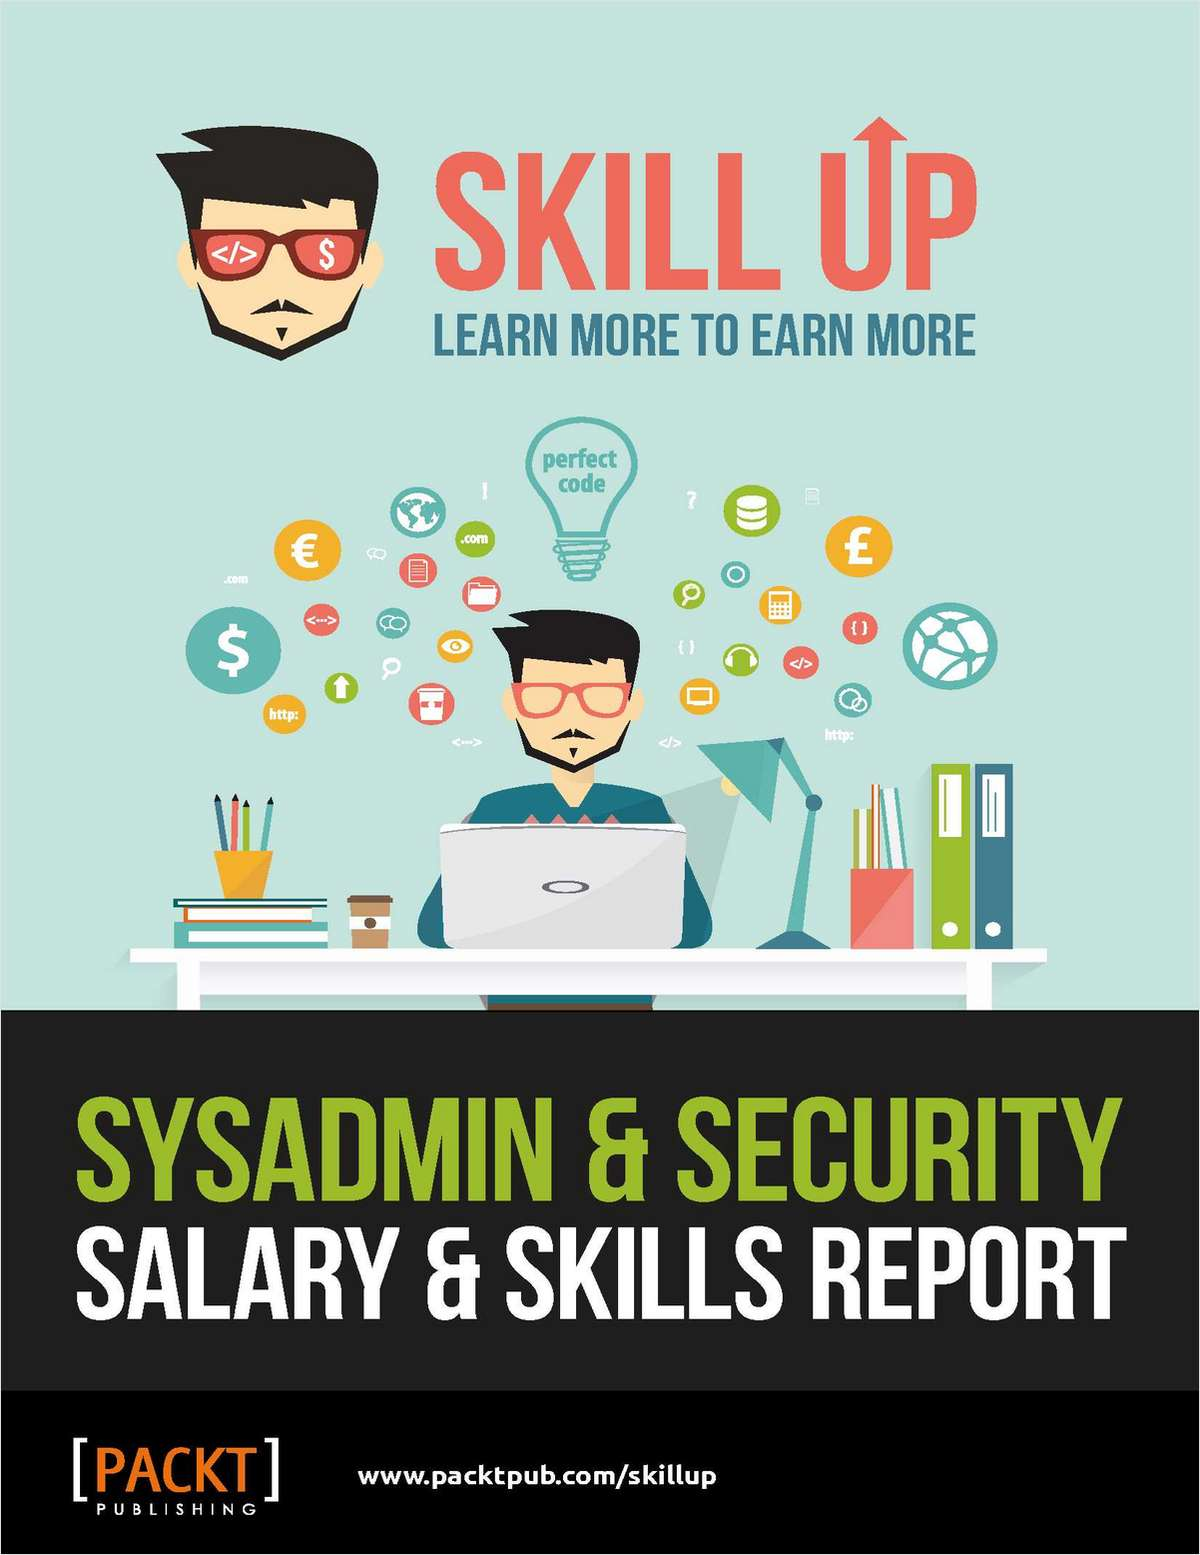 System Administration & Security - Salary & Skills Report Screenshot